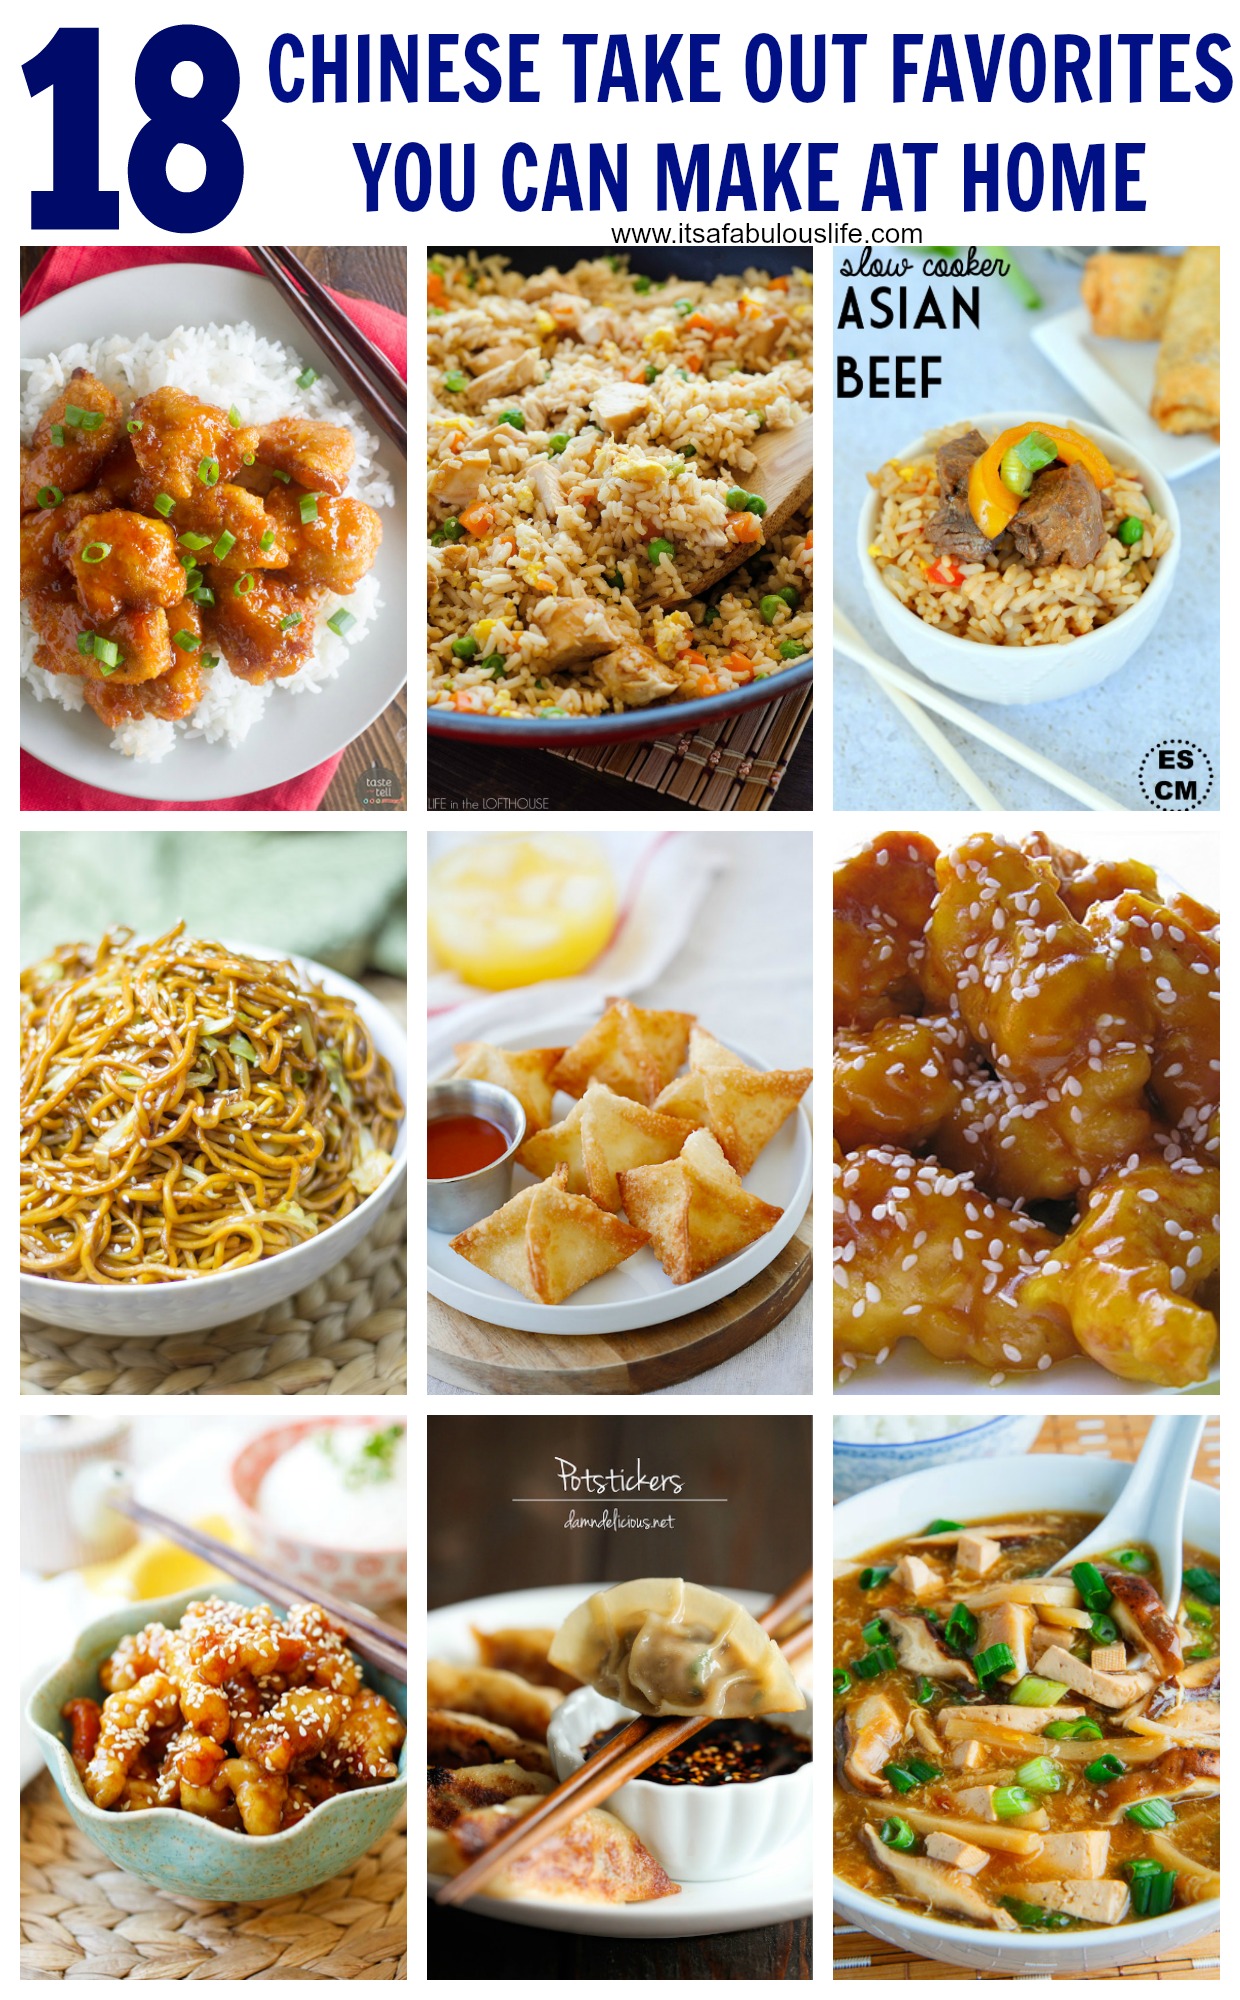 18 Chinese Recipes: Take Out Favorites You Can Make At Home